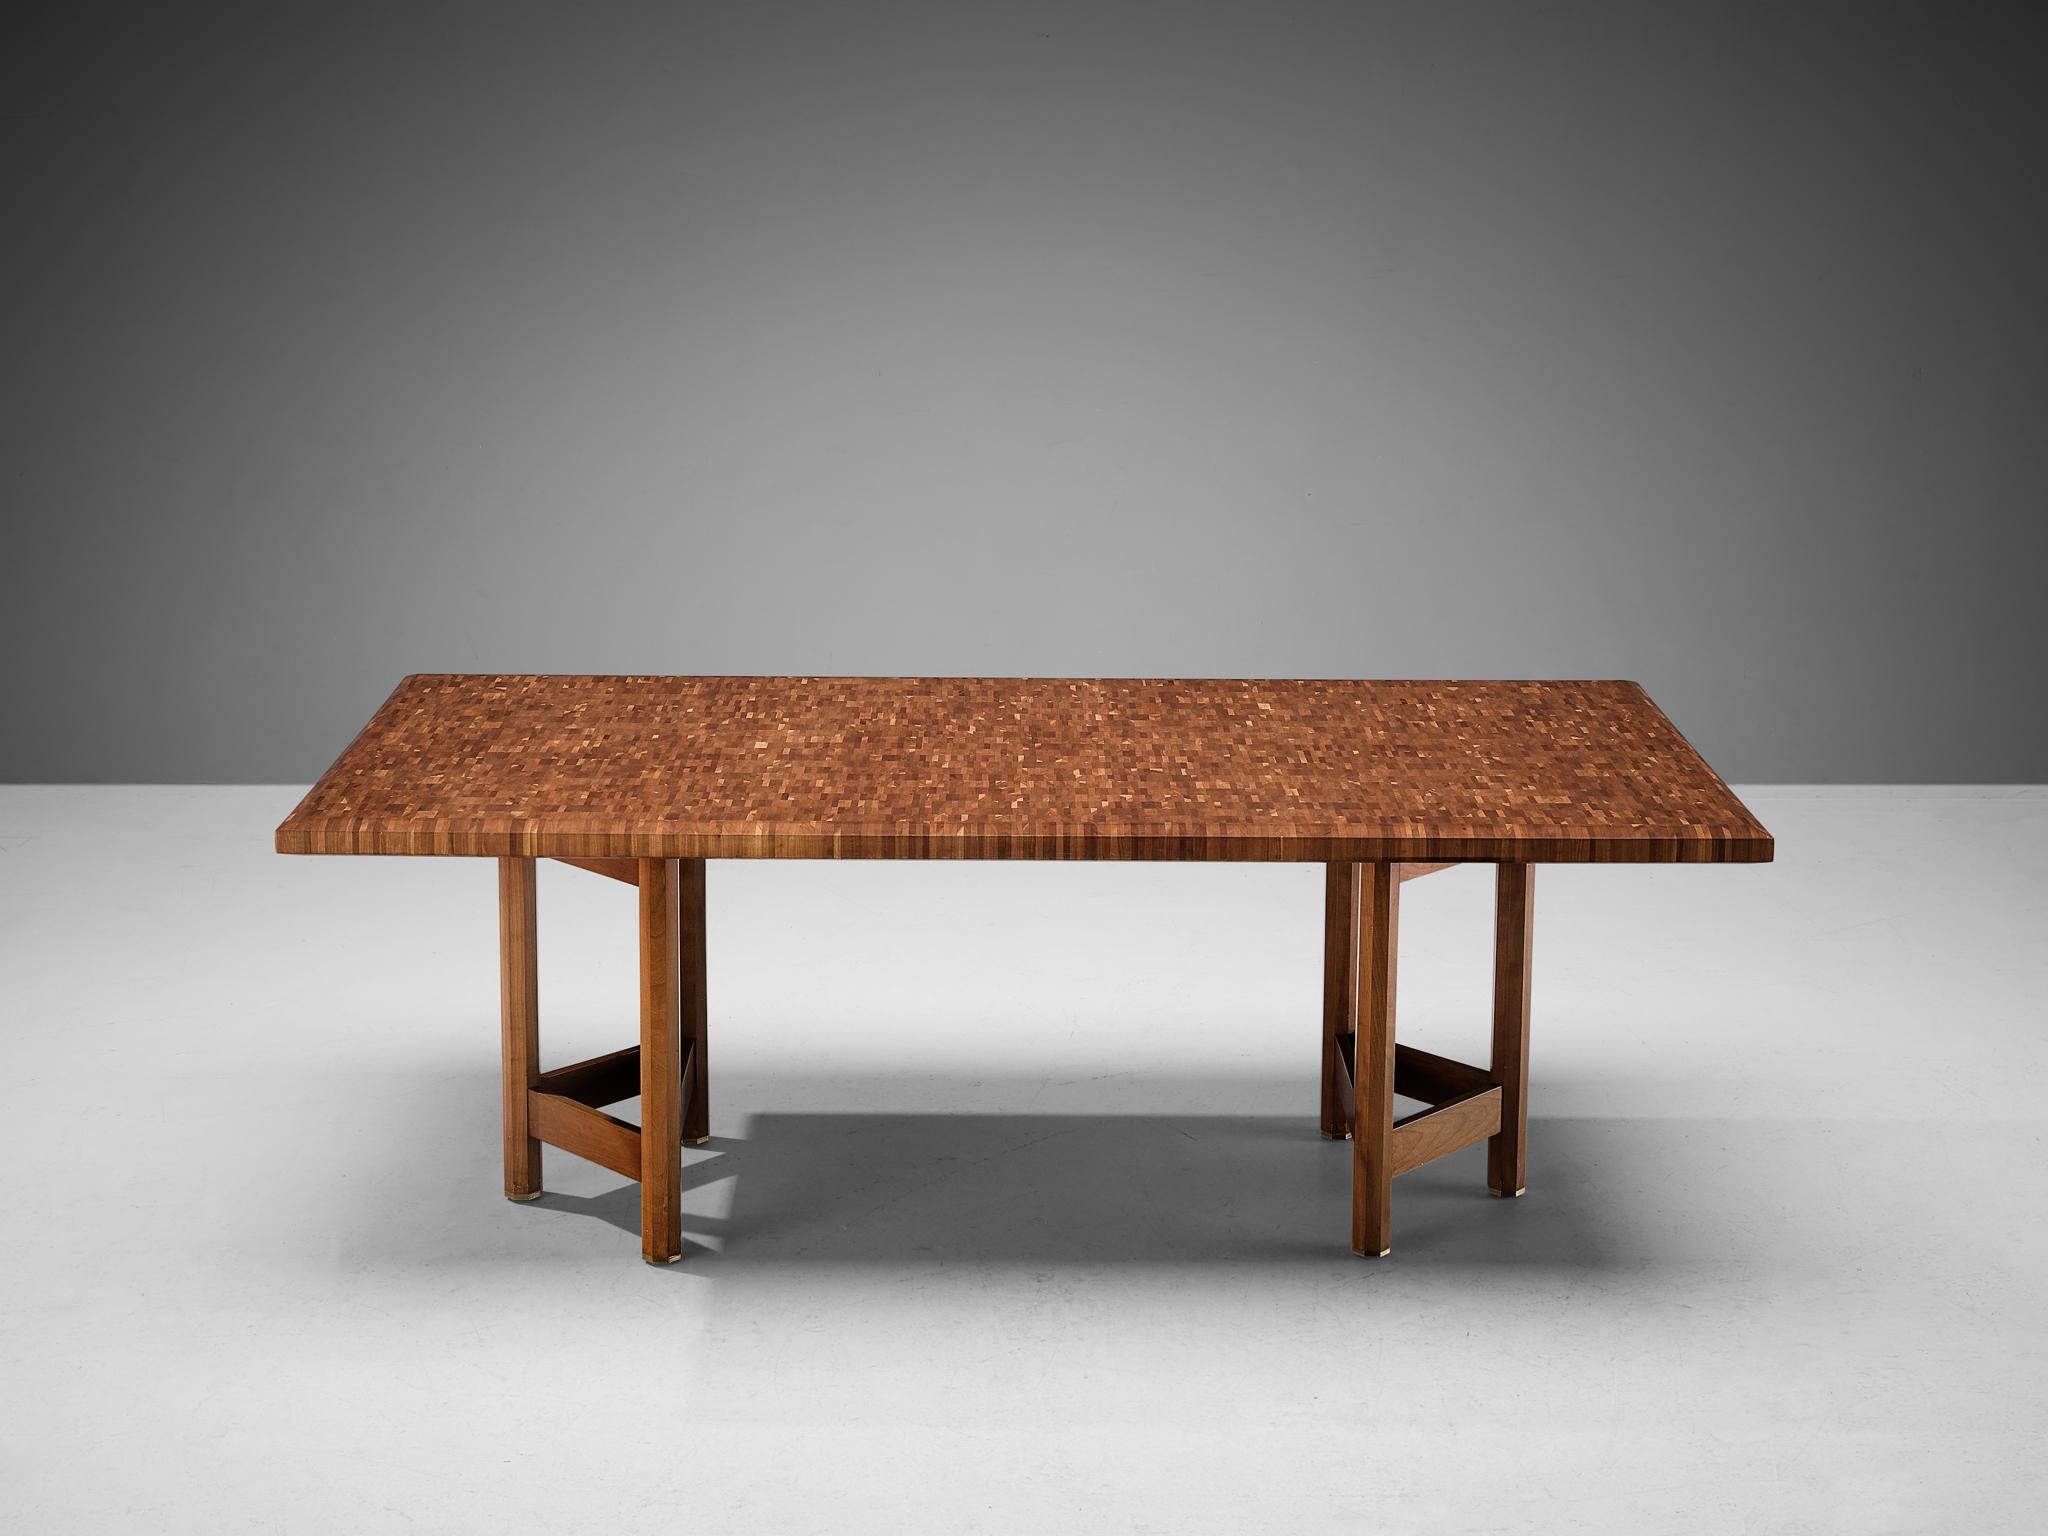 Jan Vlug, dining table, walnut, metal, brass, Belgium, 1970s

Glorious and rare dining table with characteristic and stunning executed tabletop. The table is made by Belgian designer Jan Vlug. Apart from the table top that catches the eye, the two